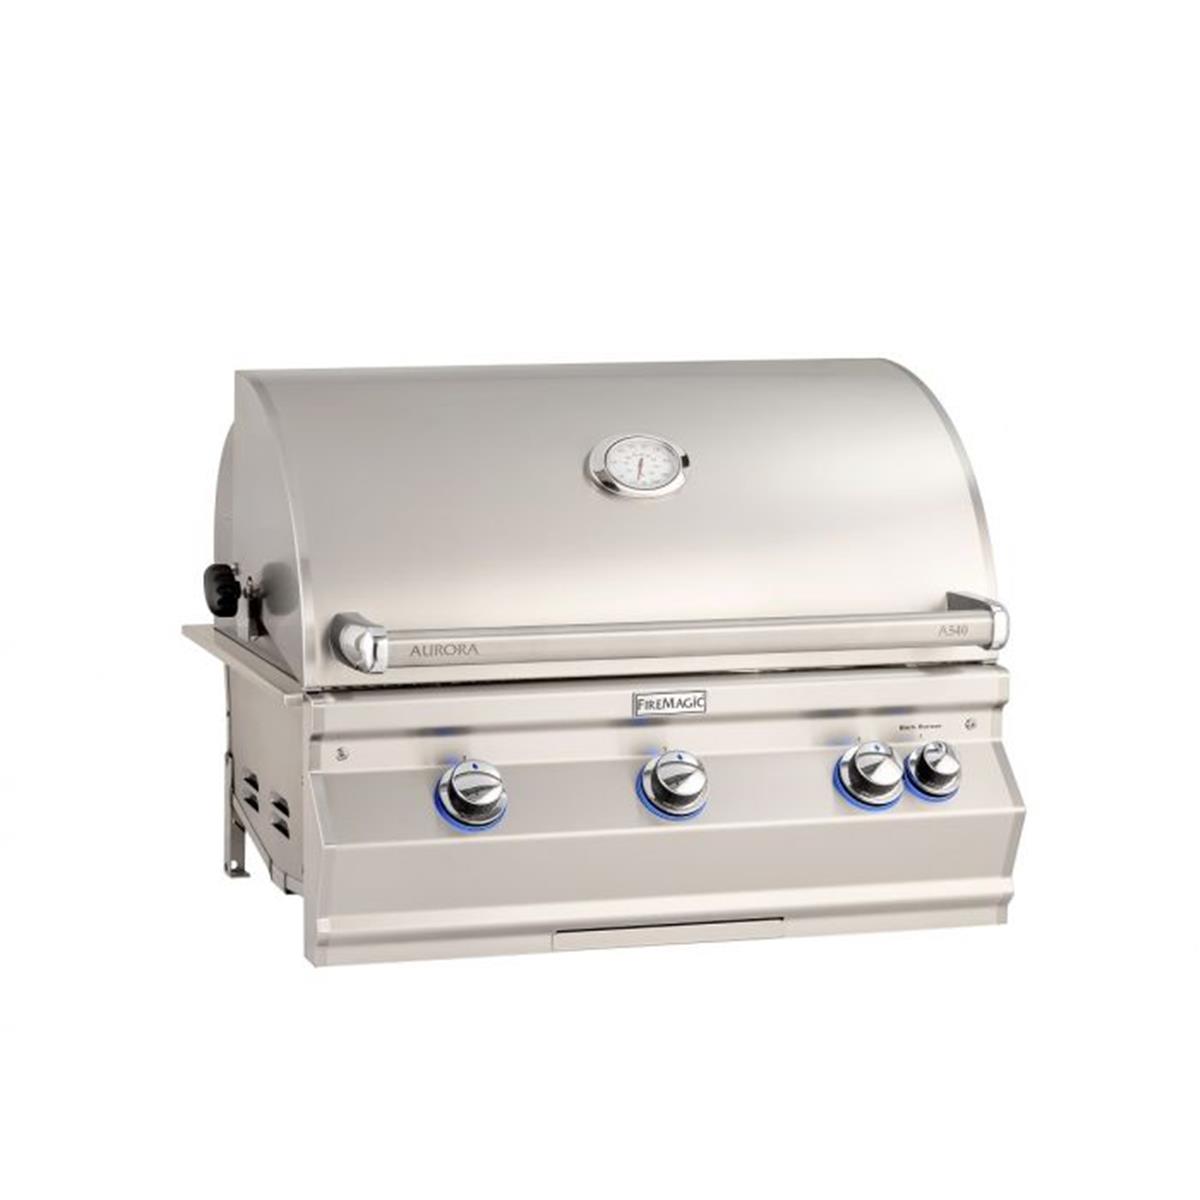 Picture of Fire Magic A540I-7EAN 30 in. Aurora Built-In Gas Grill with Analog Thermometer - Natural Gas - A540i HSI